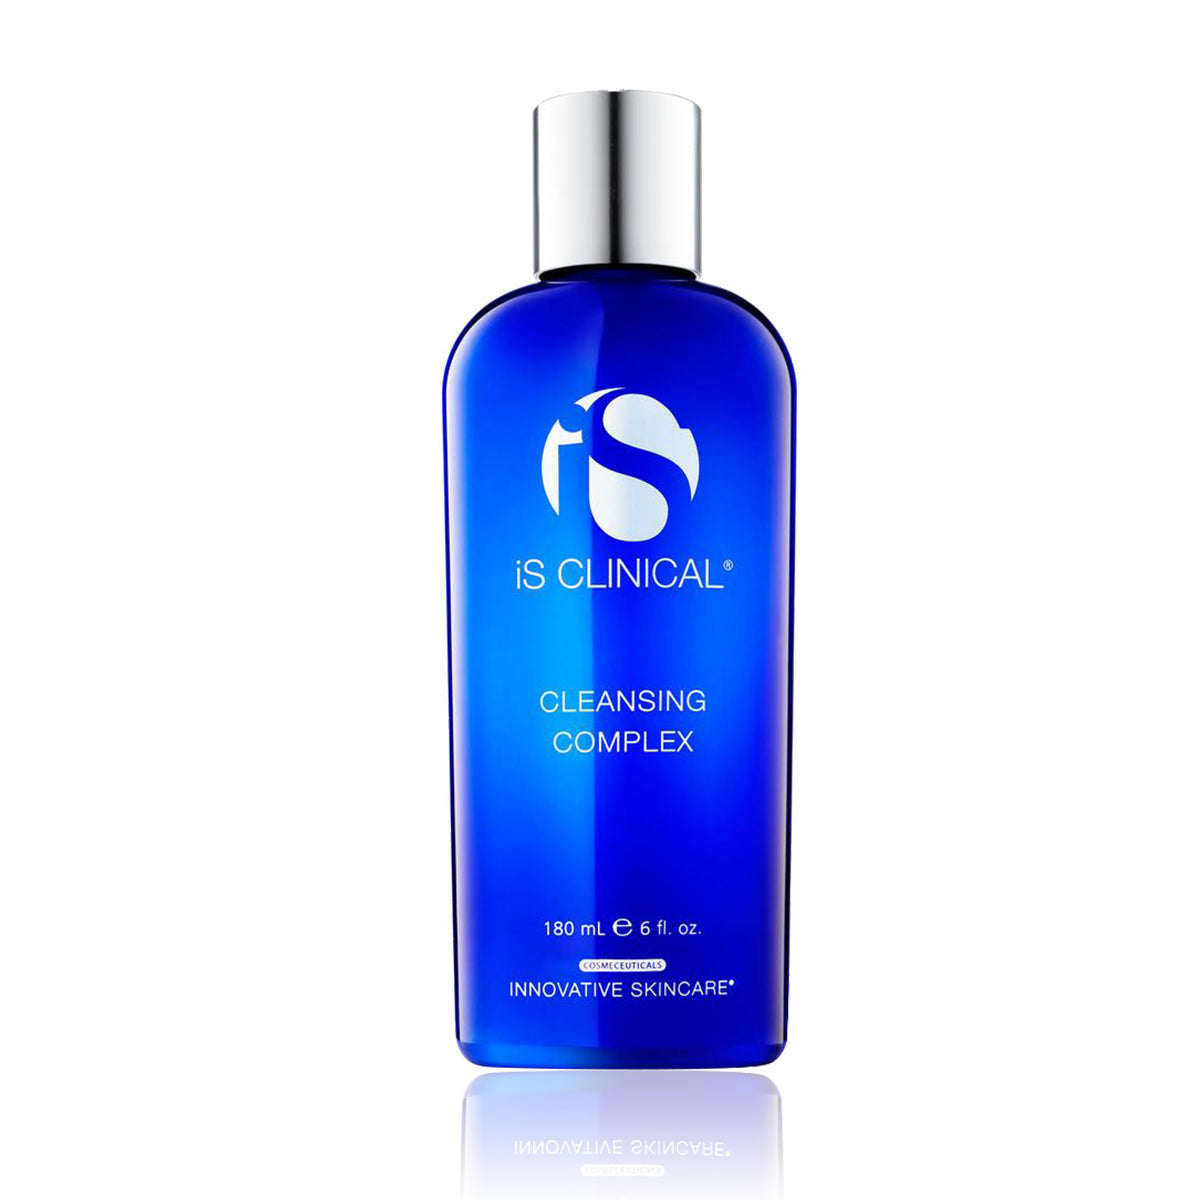 IS CLINICAL Deep Complex Cleansing Liquid | Cleansing Complex 180ml